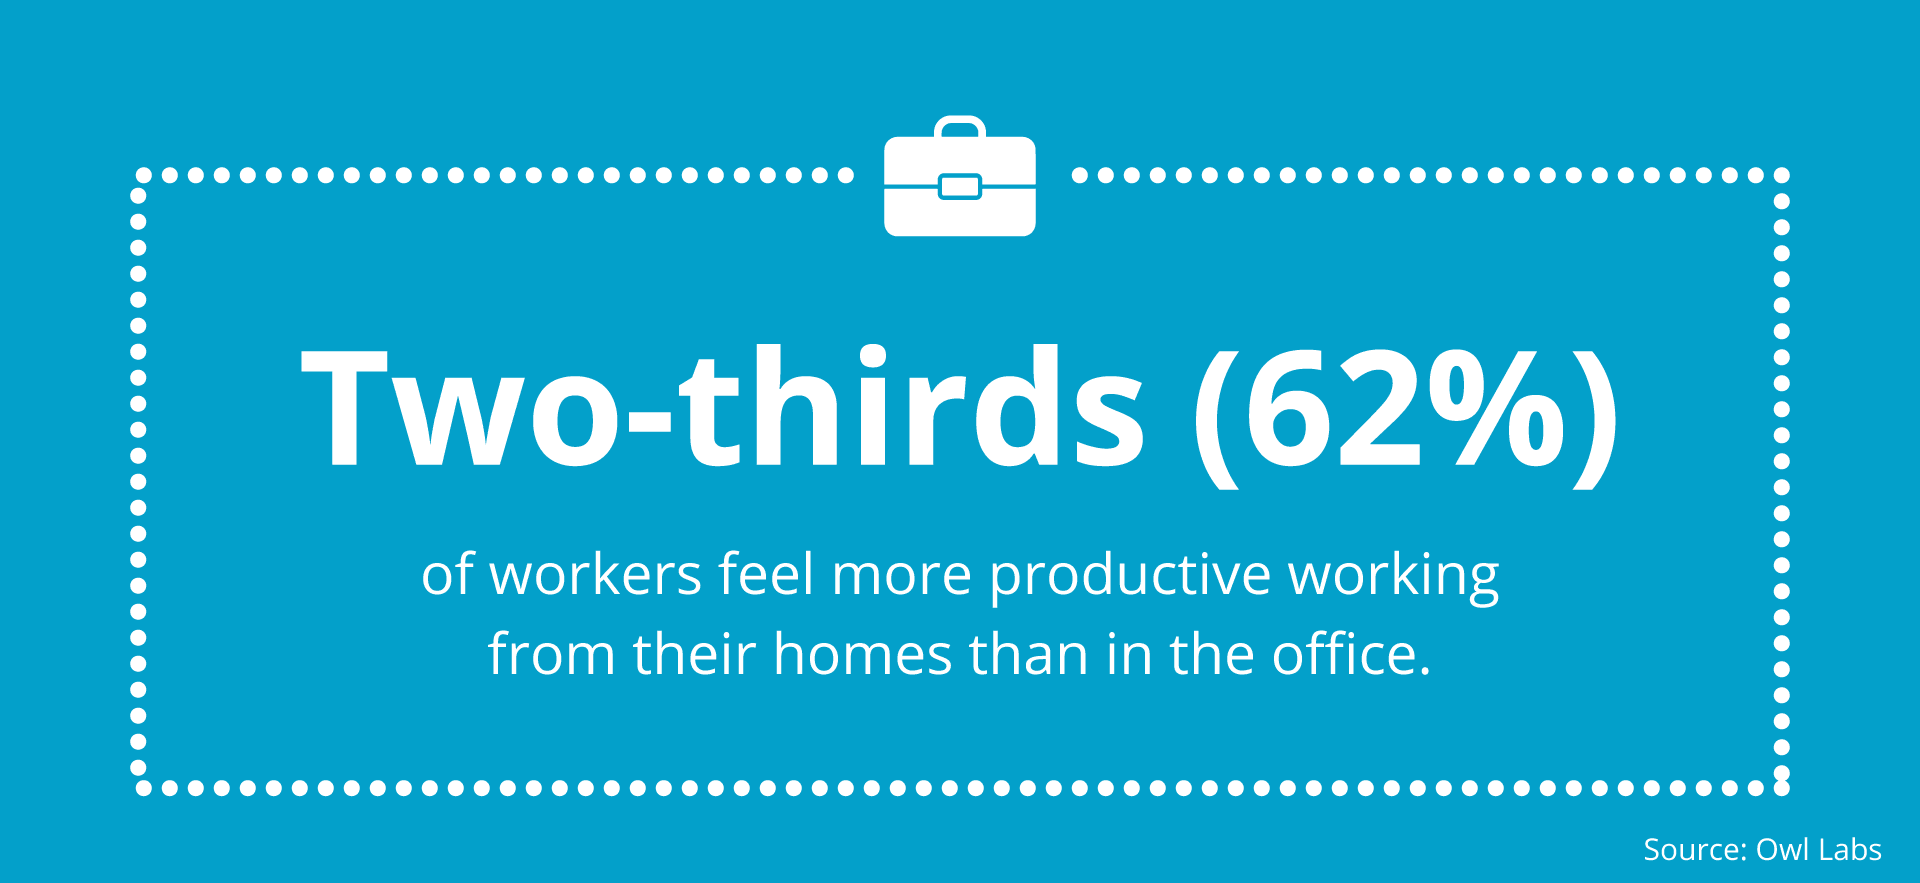 Employees feel more productive while working from home, but it has increased server endpoints that need to be protected.